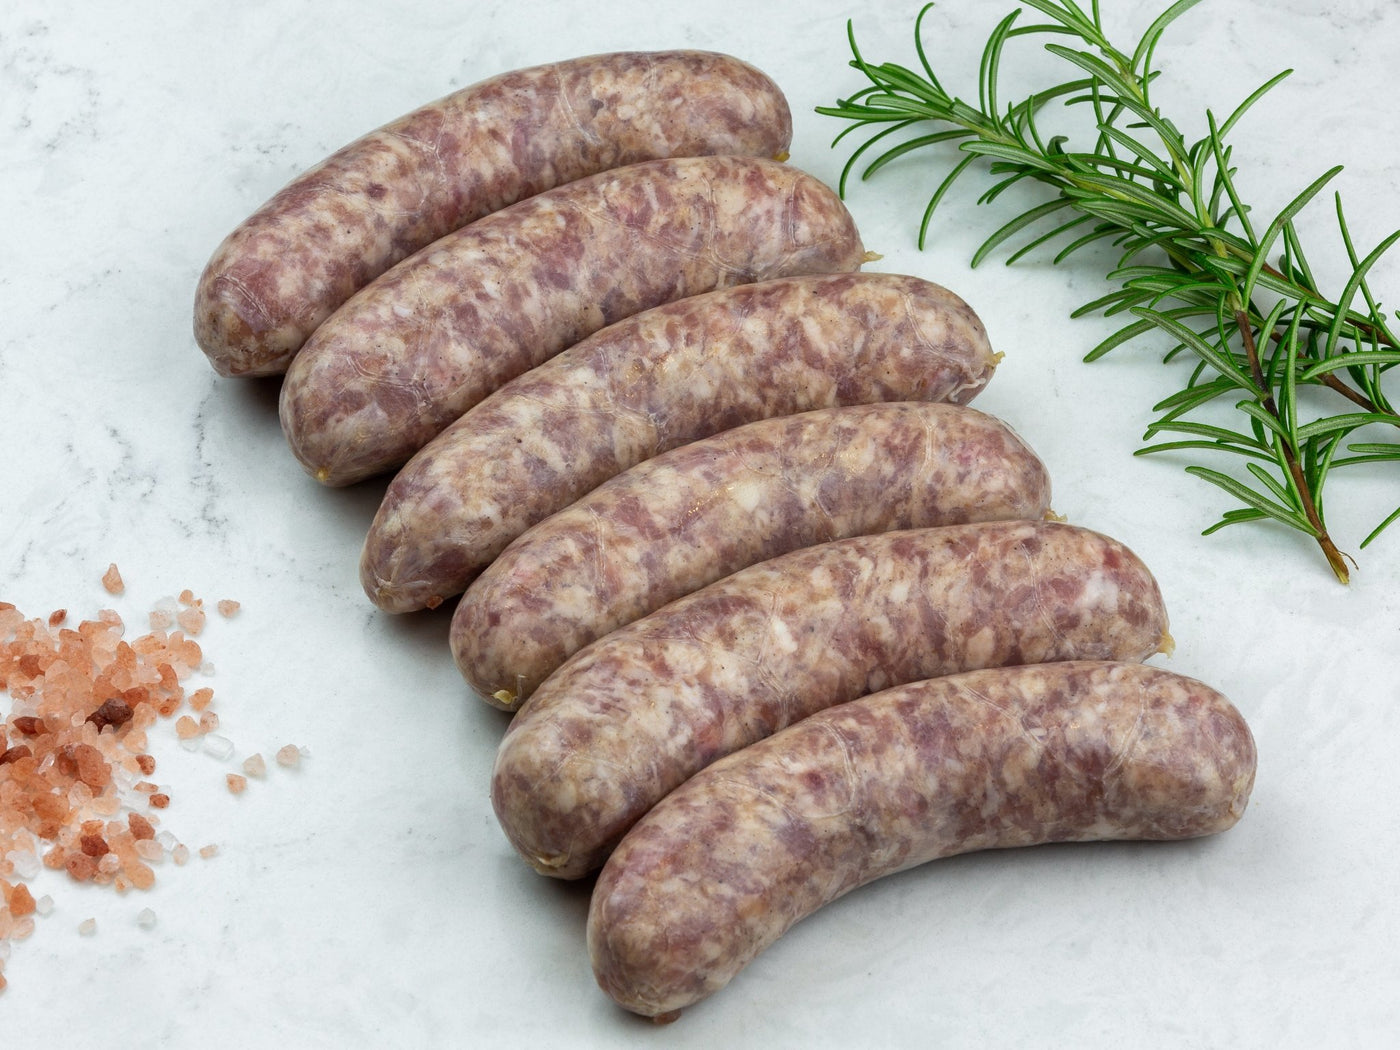 The Traditional Pork Sausage - Pork - Thomas Joseph Butchery - Ethical Dry-Aged Meat The Best Steak UK Thomas Joseph Butchery